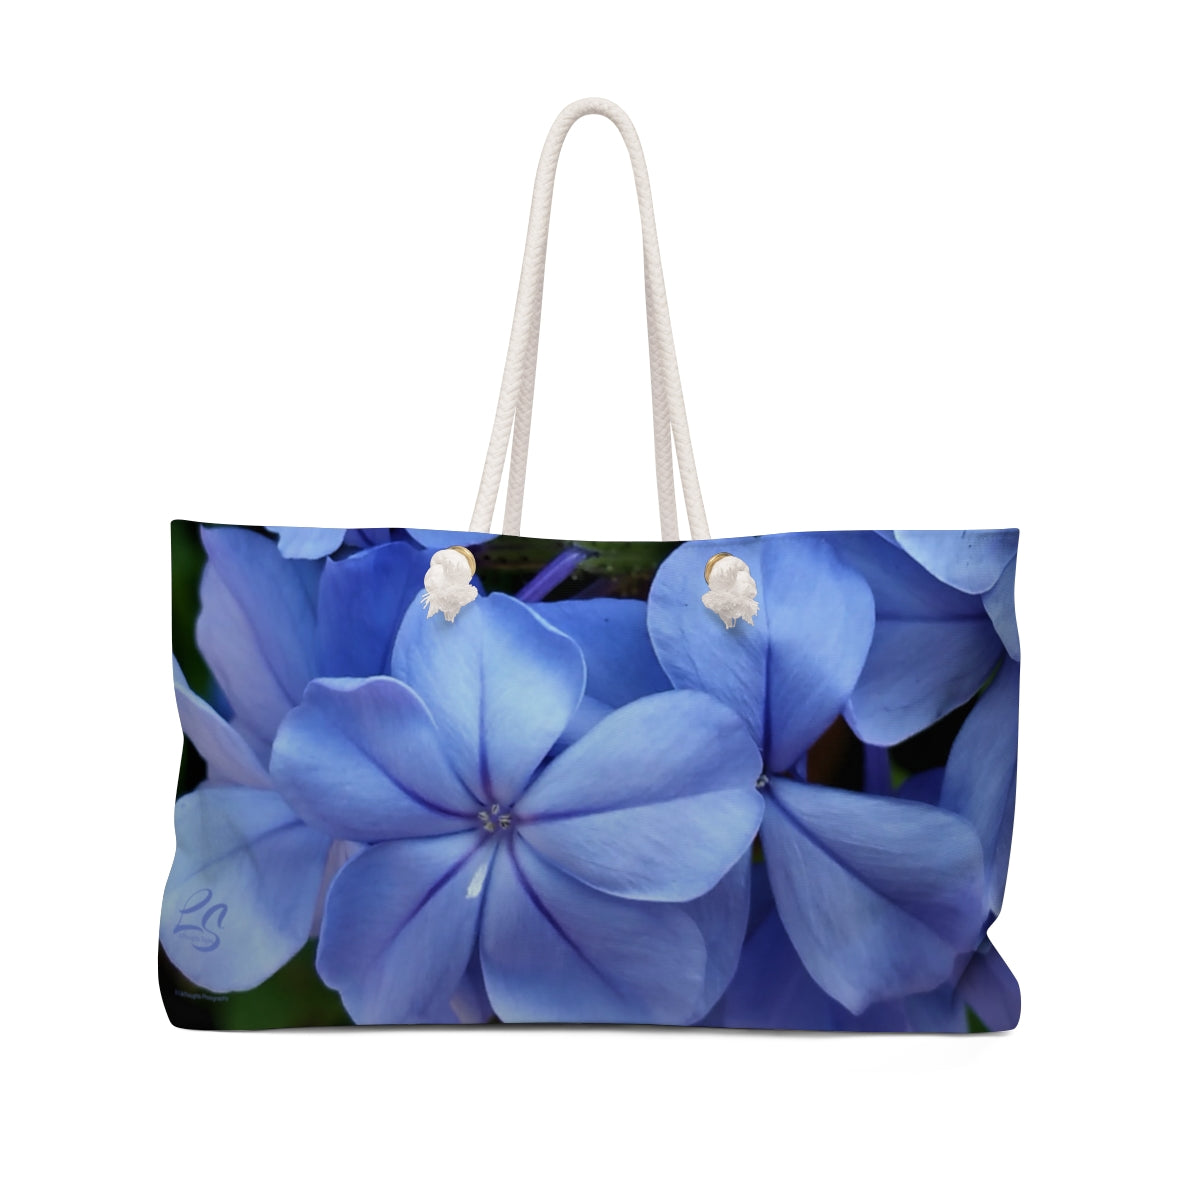 Accessorize London Women's Faux Leather Blue Floral Embroidered Tote Bag